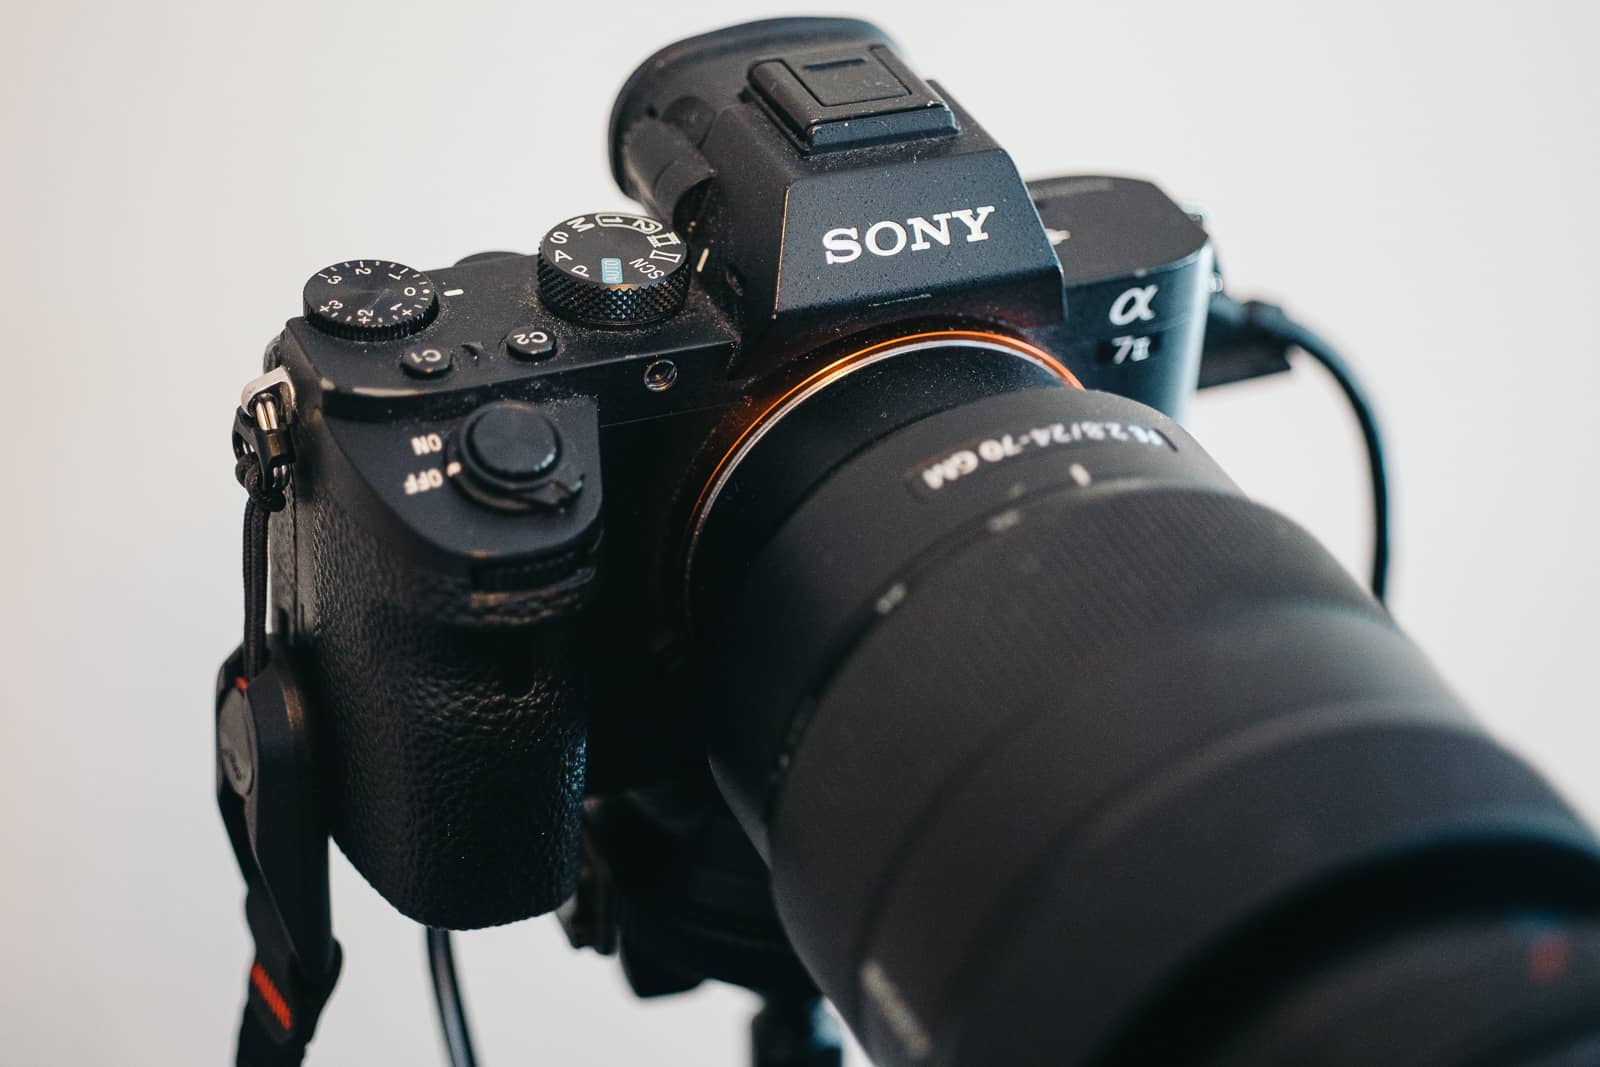 Cables plugged into the Sony Alpha A7II